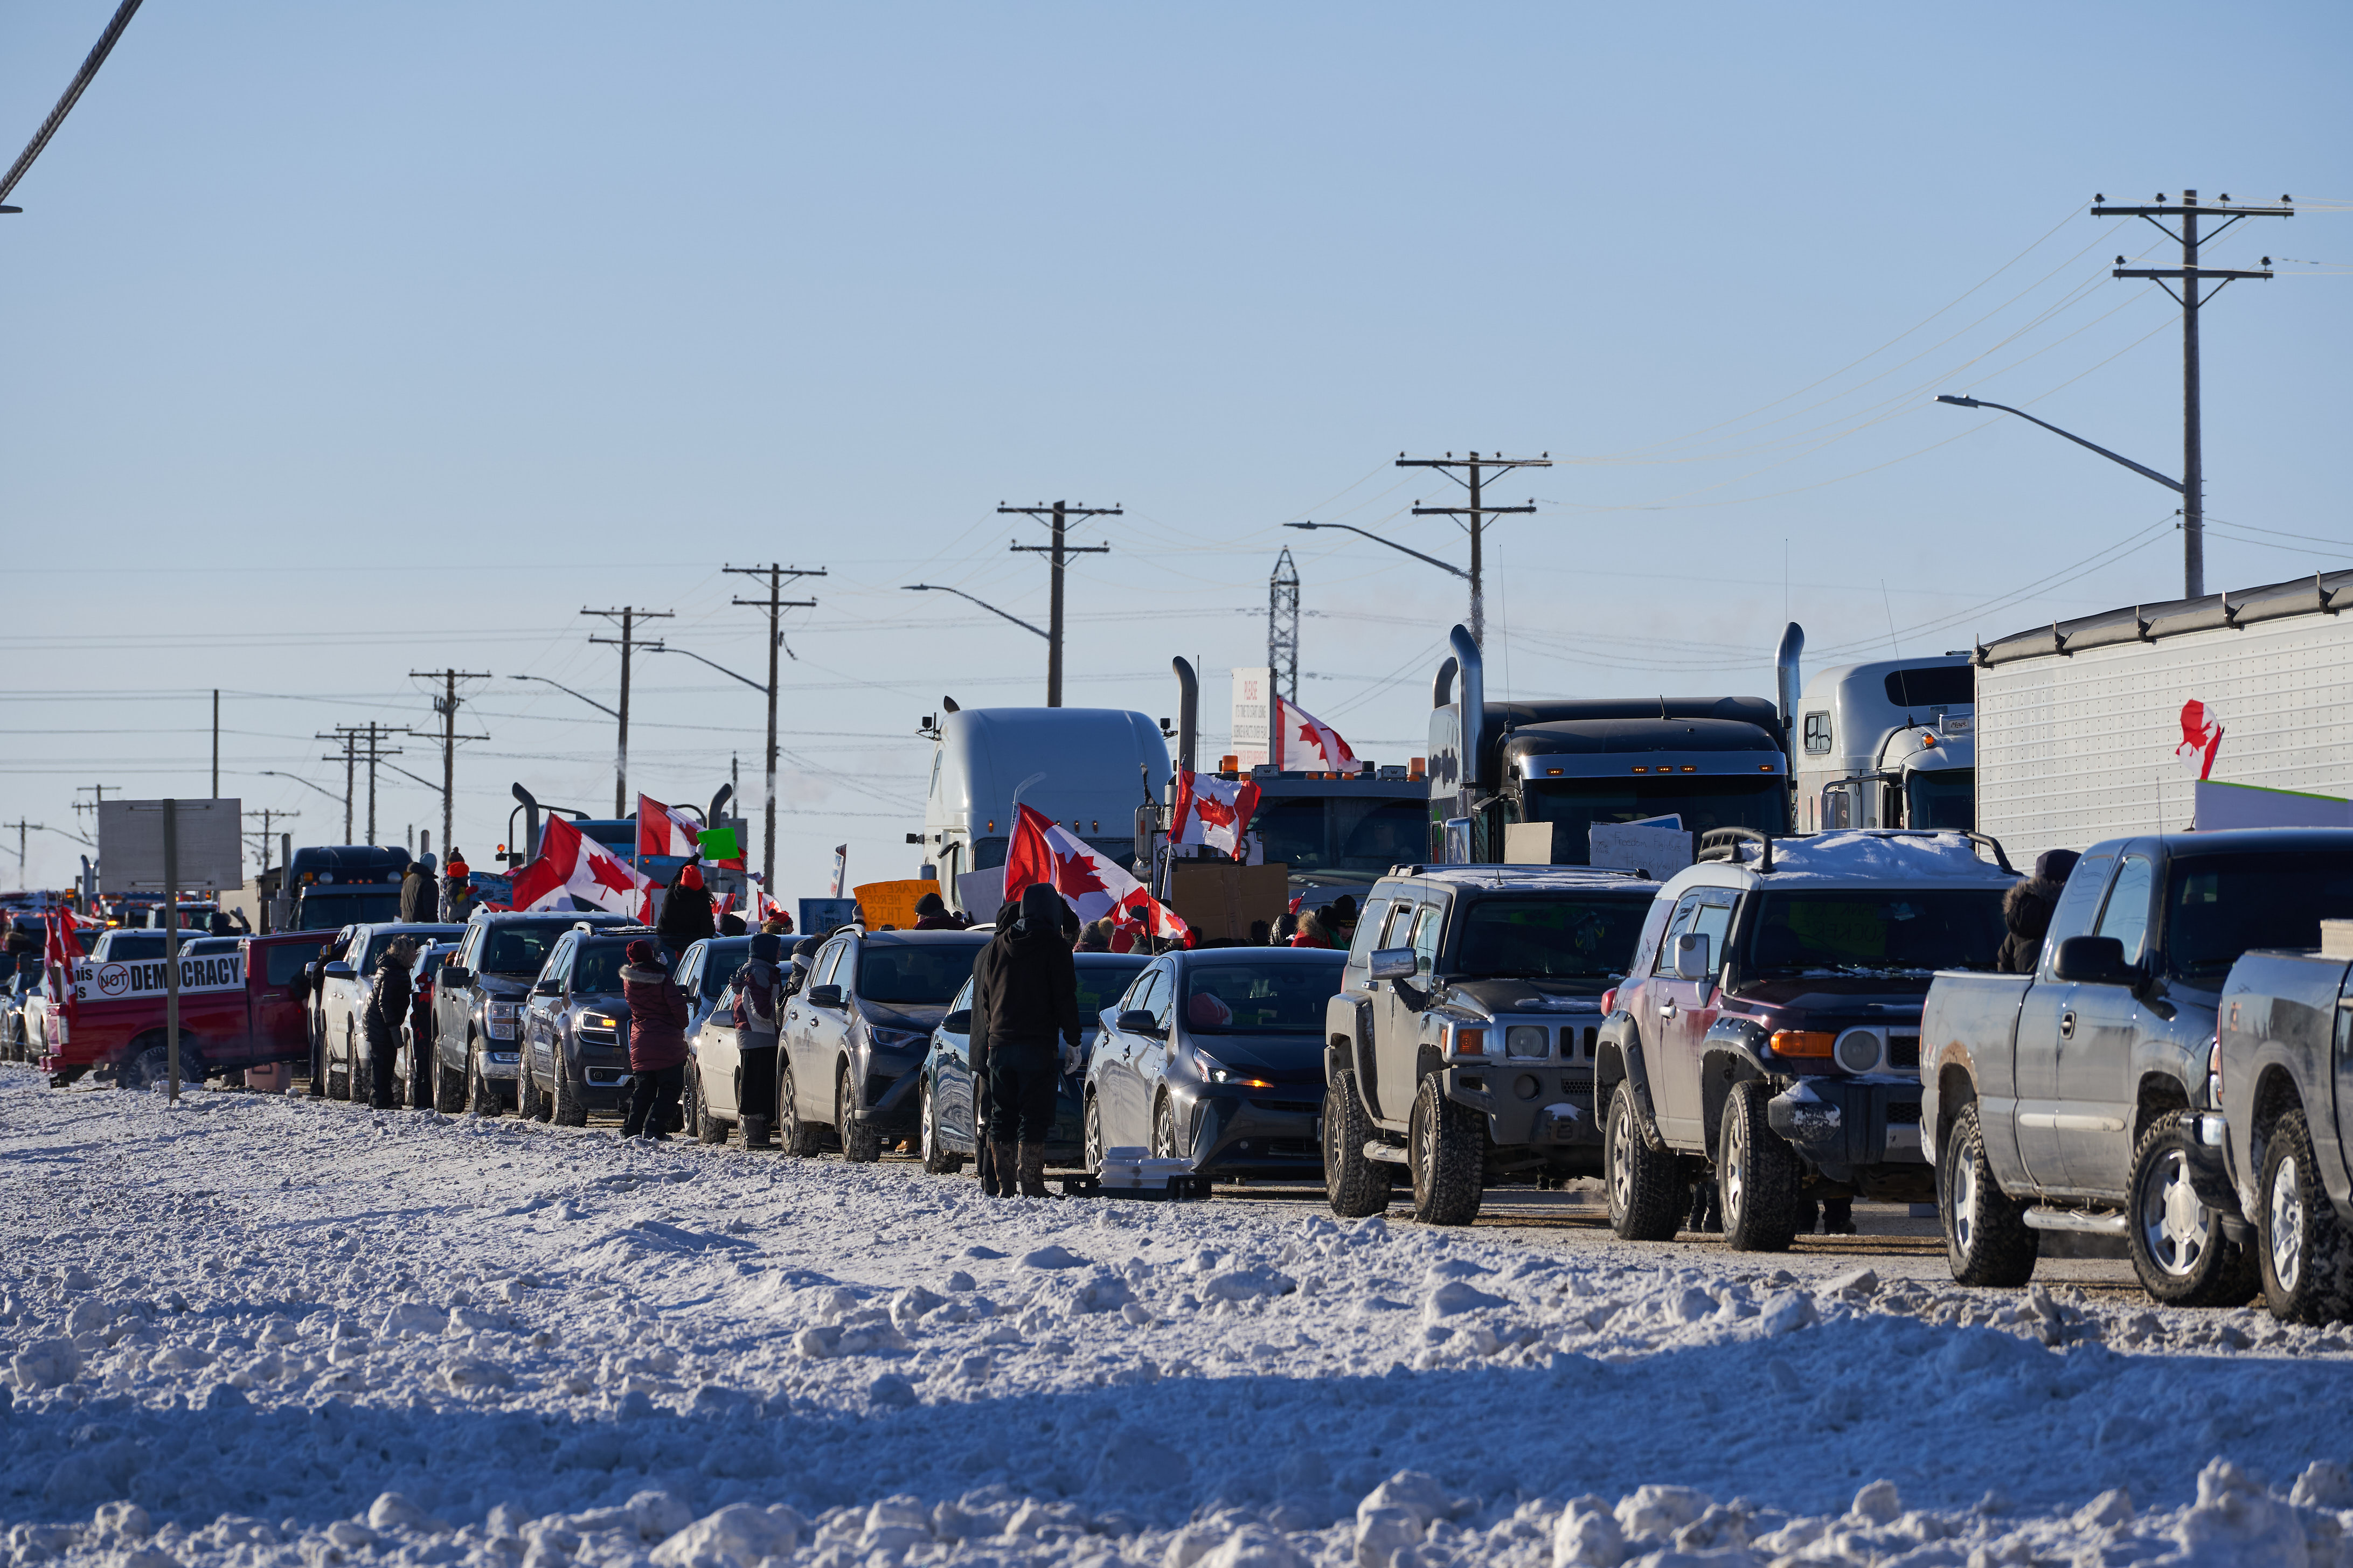 Expect traffic delays as convoy protest reaches London on Thursday: OPP